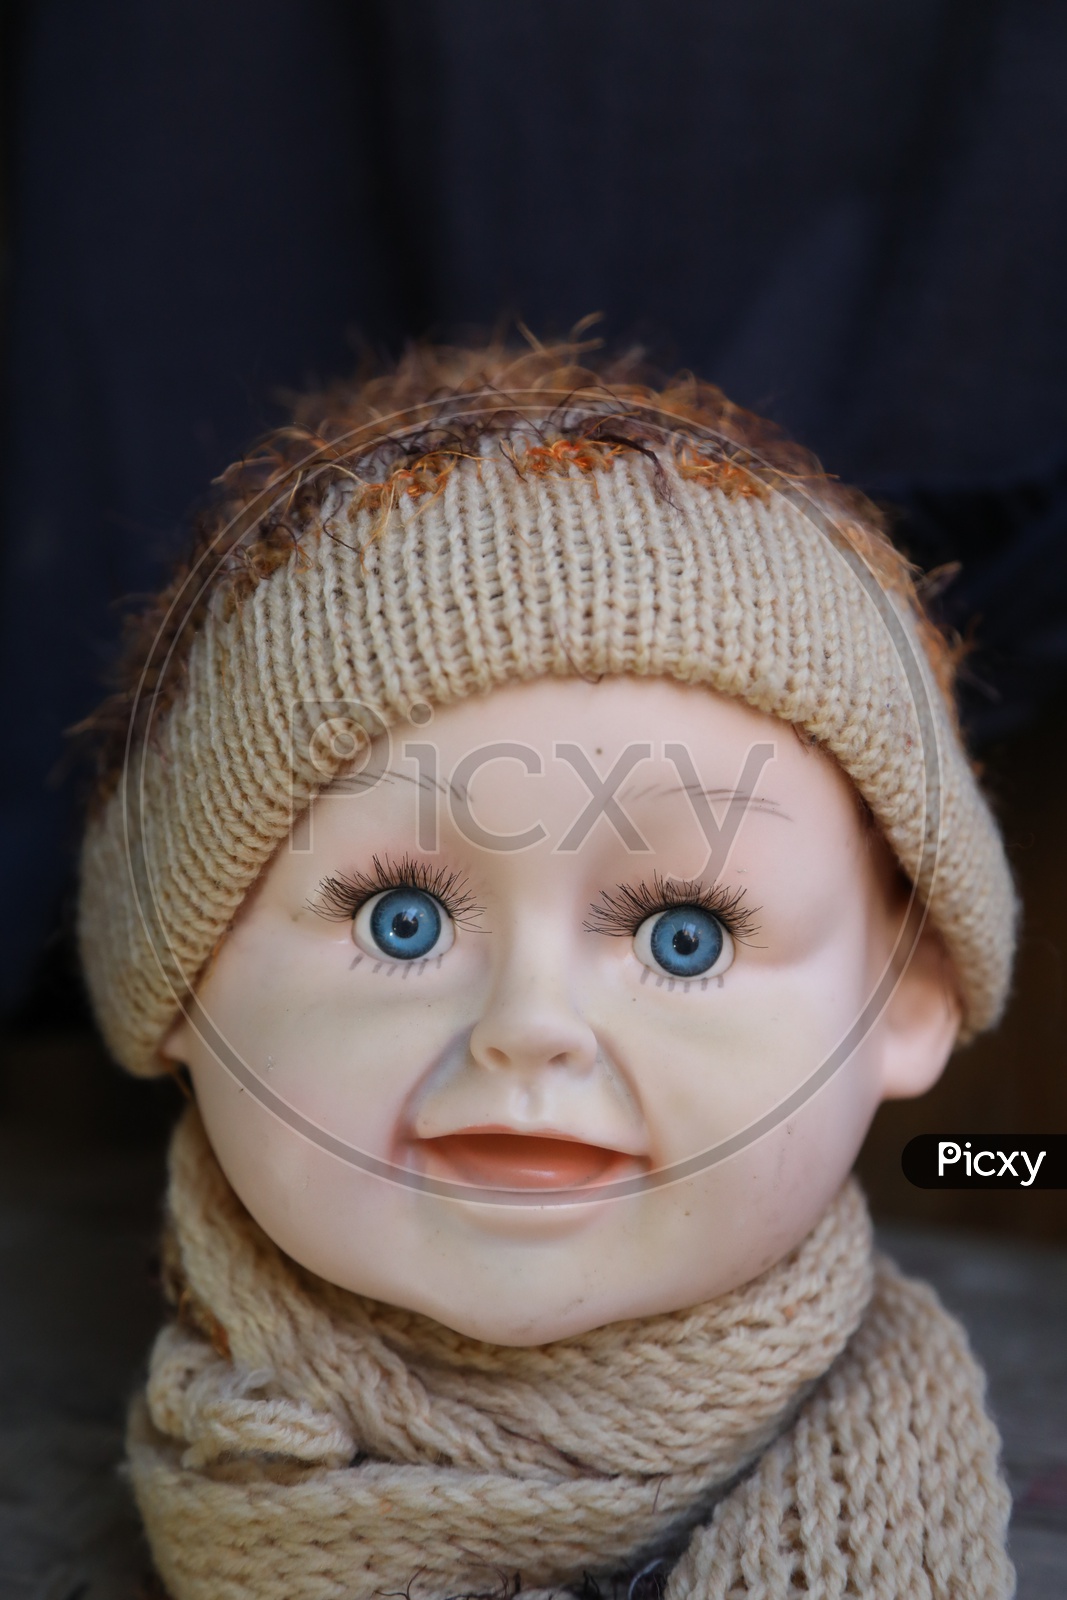 Blue eyes of a baby figurine